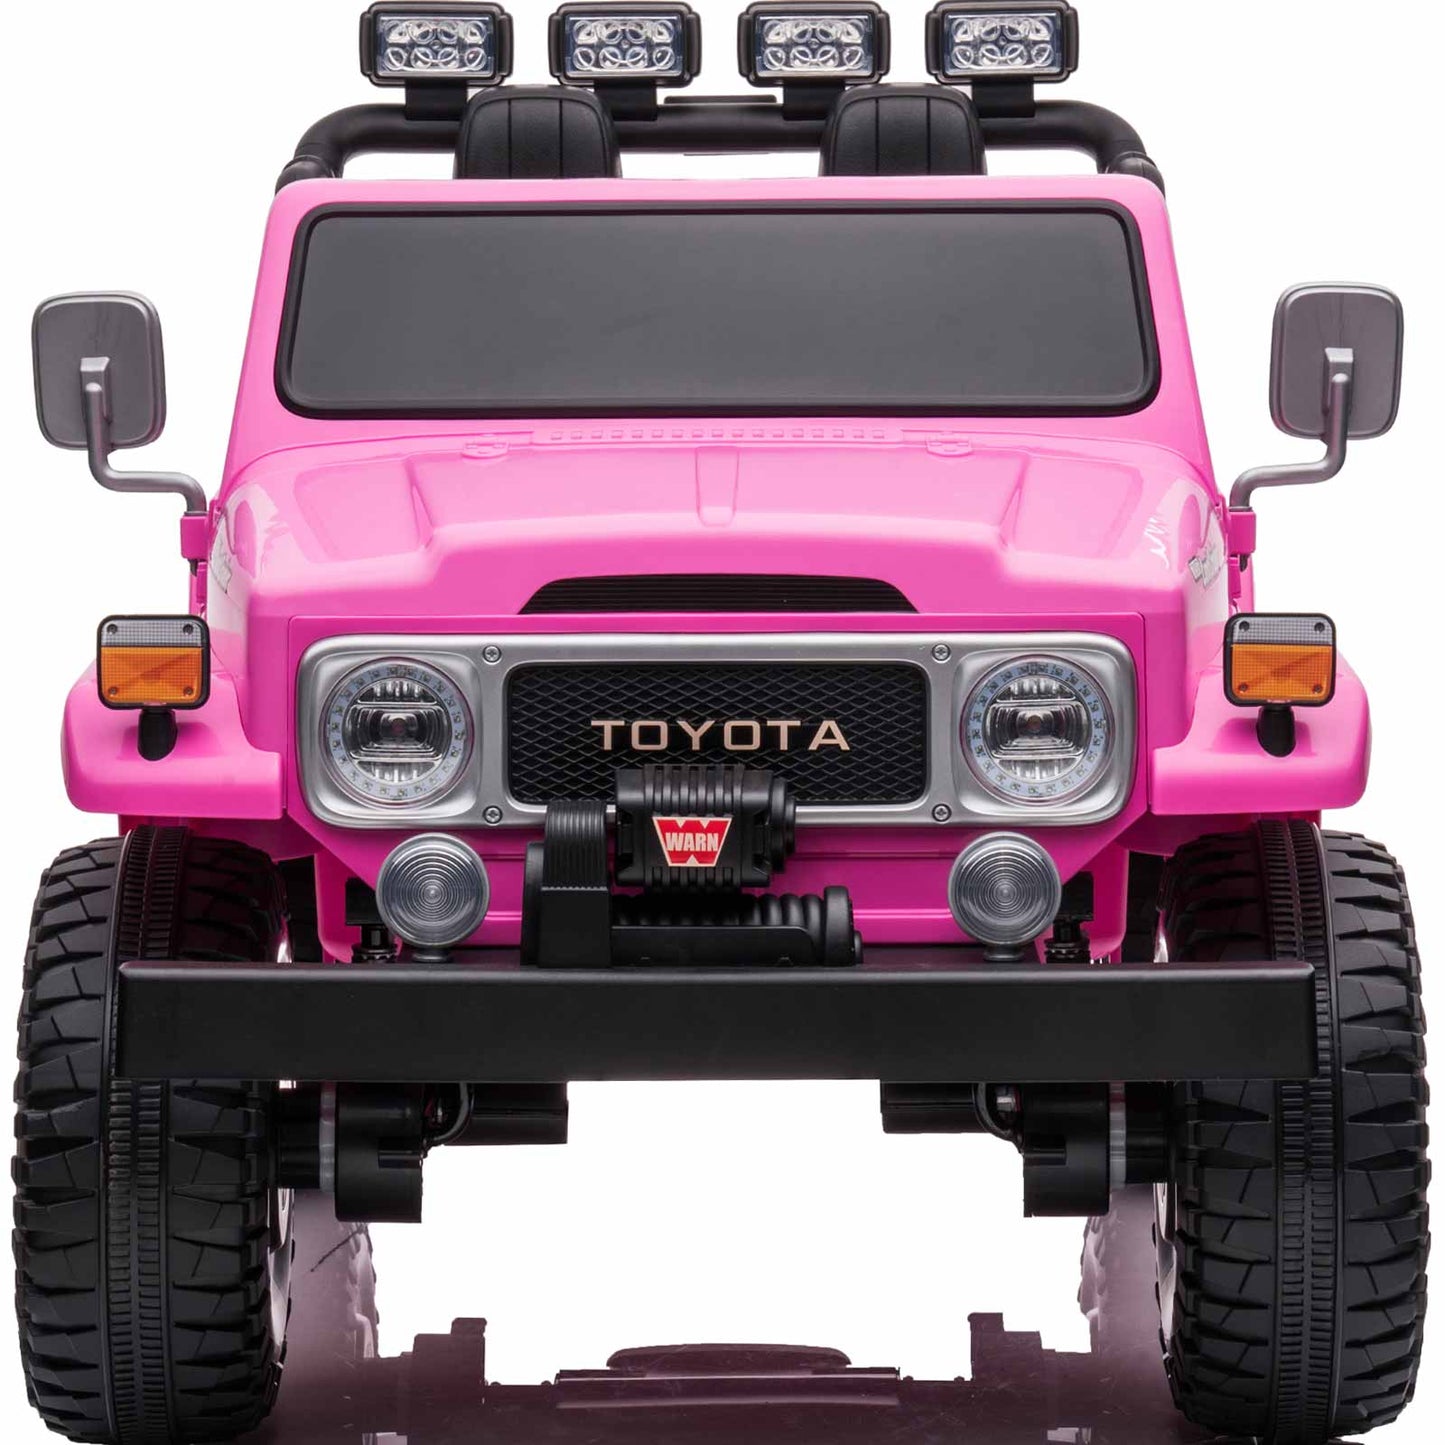 Wisairt-24v-kids-ride-on-car-2-seater-licensed-toyota-battery-powered-electric-vehicle-w-remote-control-mp3-music-bluetooth-led-lights